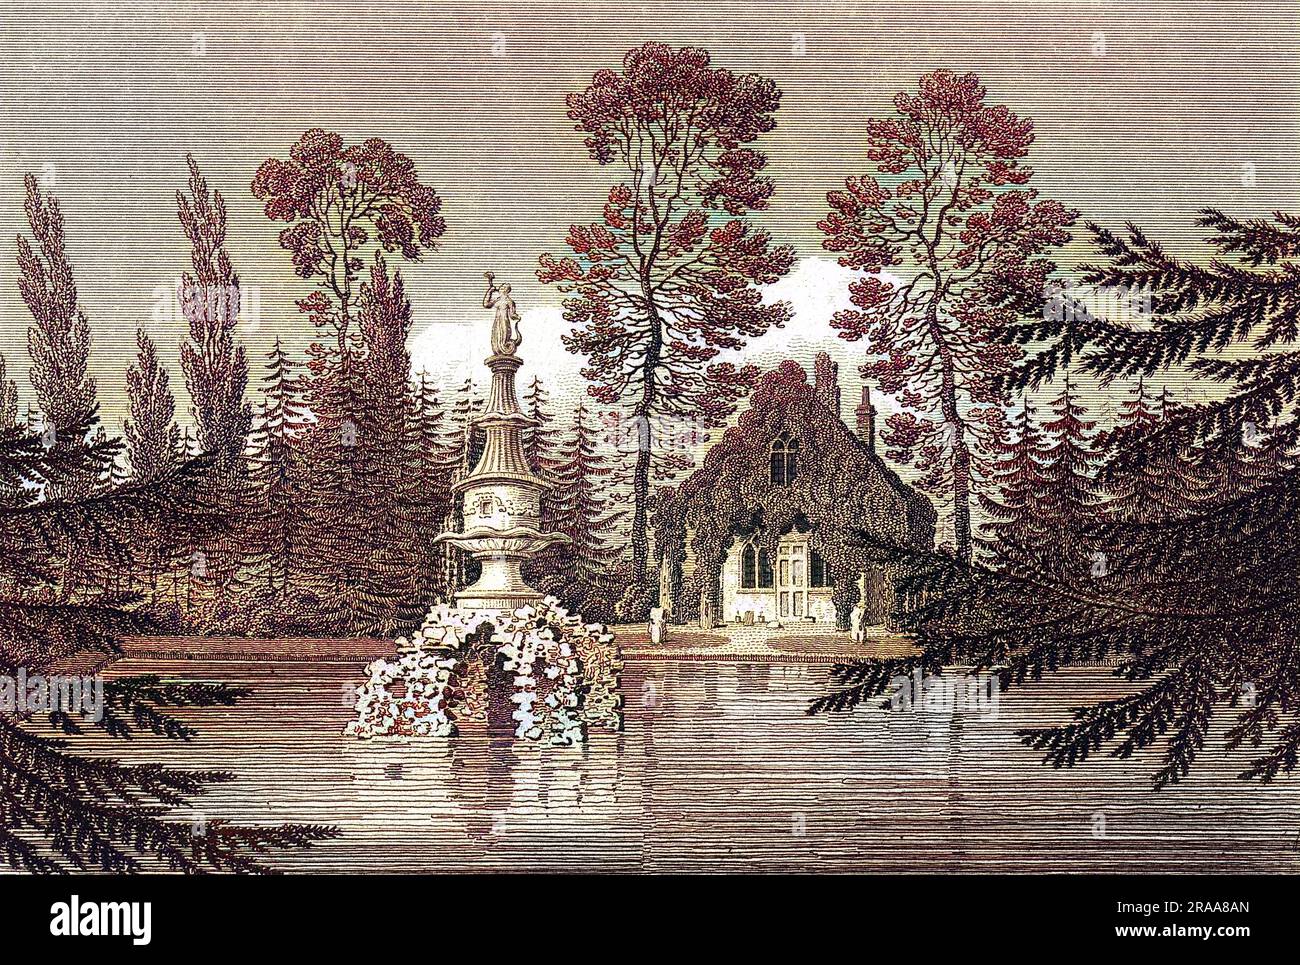 Cottage Fountain, à Camberwell Grove. Date: 1811 Banque D'Images